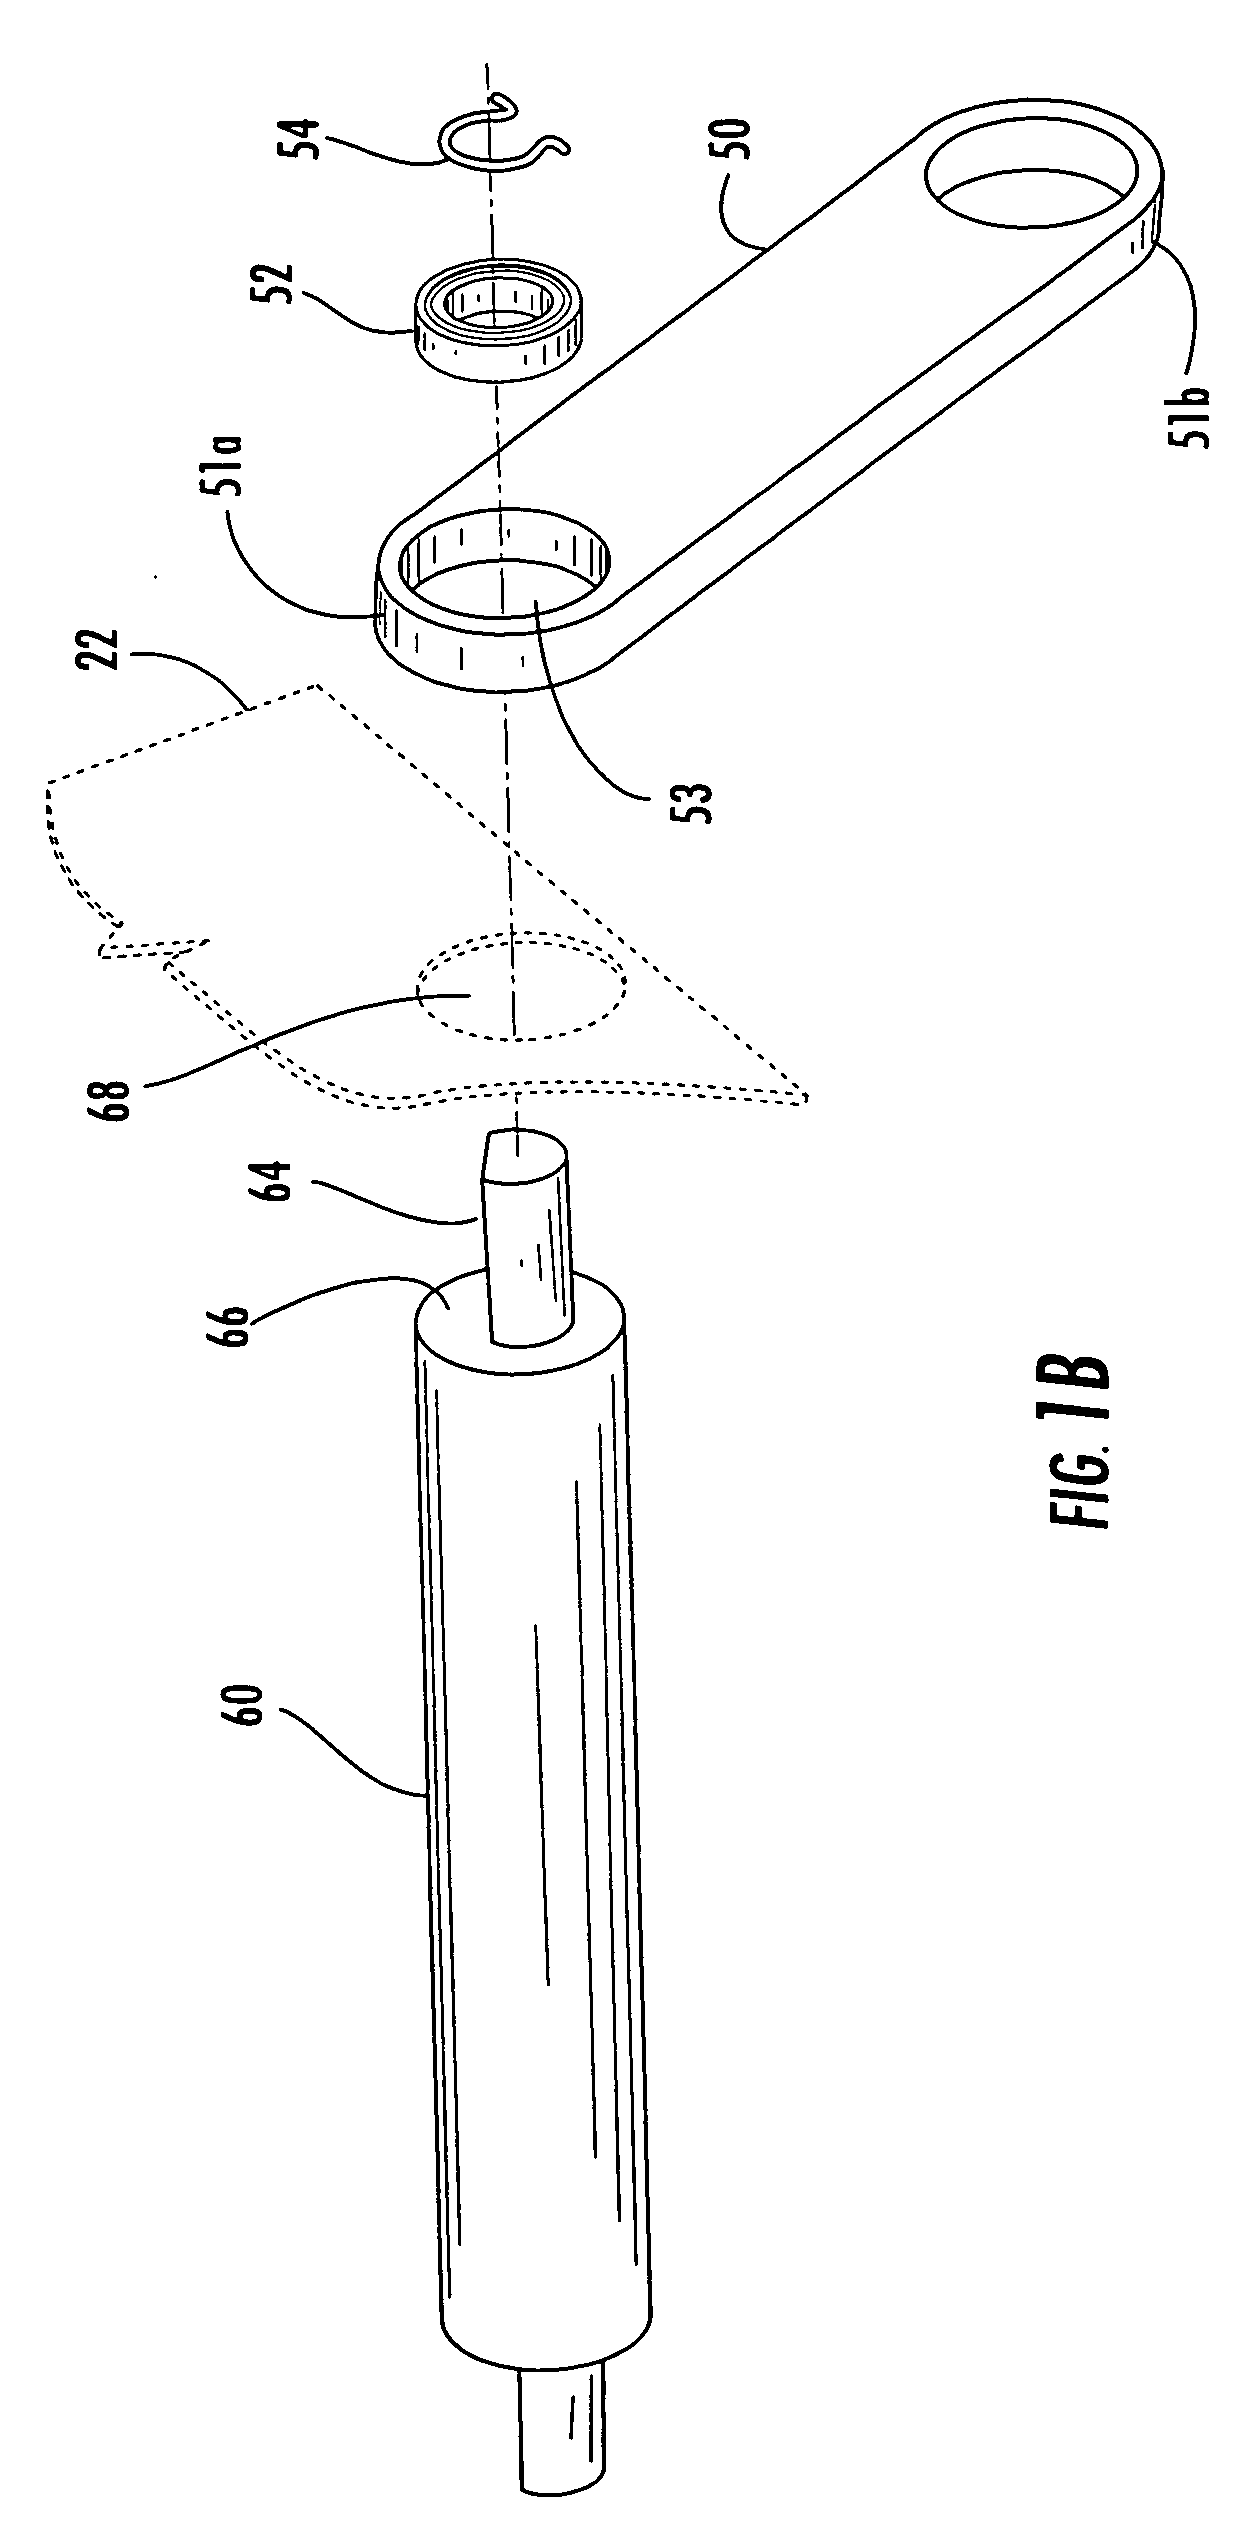 Apparatus and system for detecting under-filled cushions